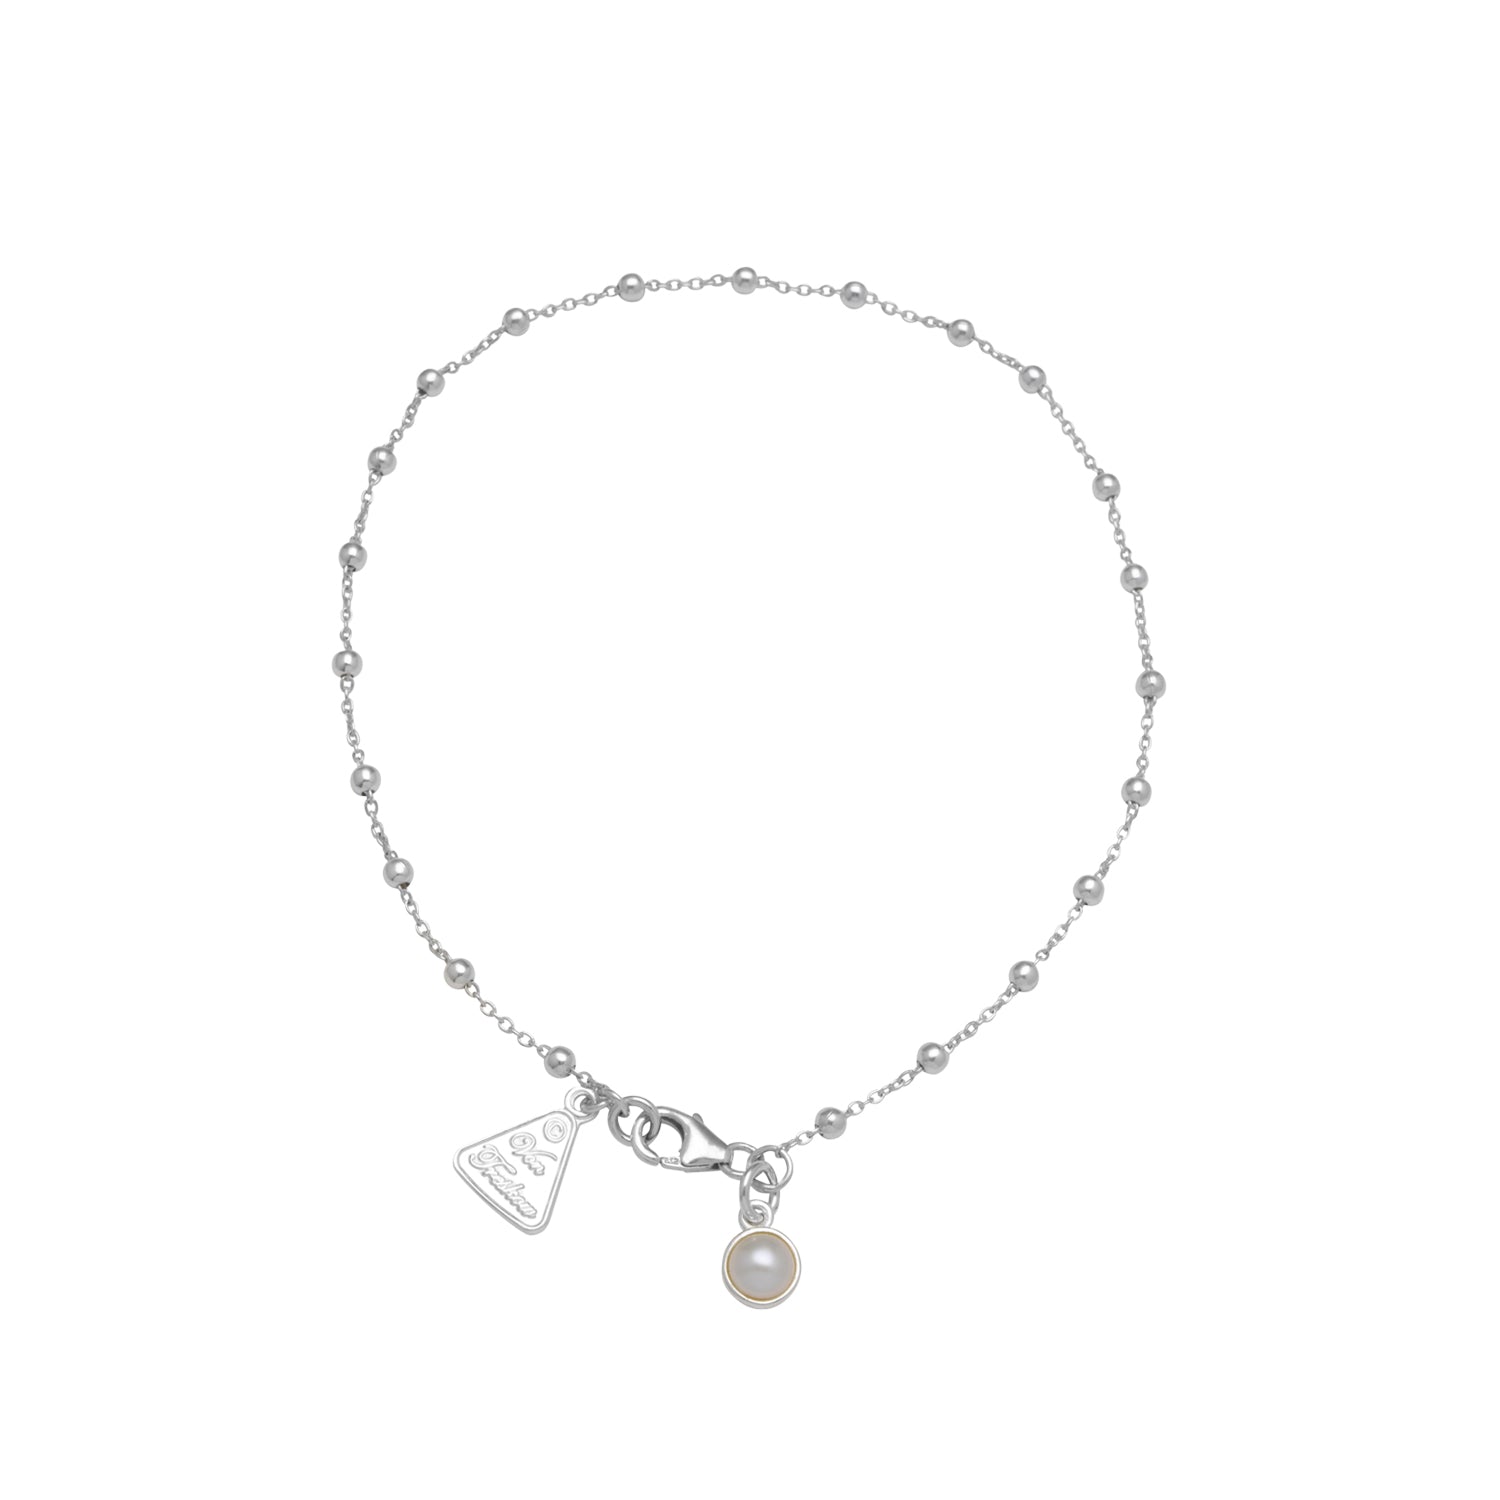 Rosario Chain Bracelet/Anklet With Pearl 24cm